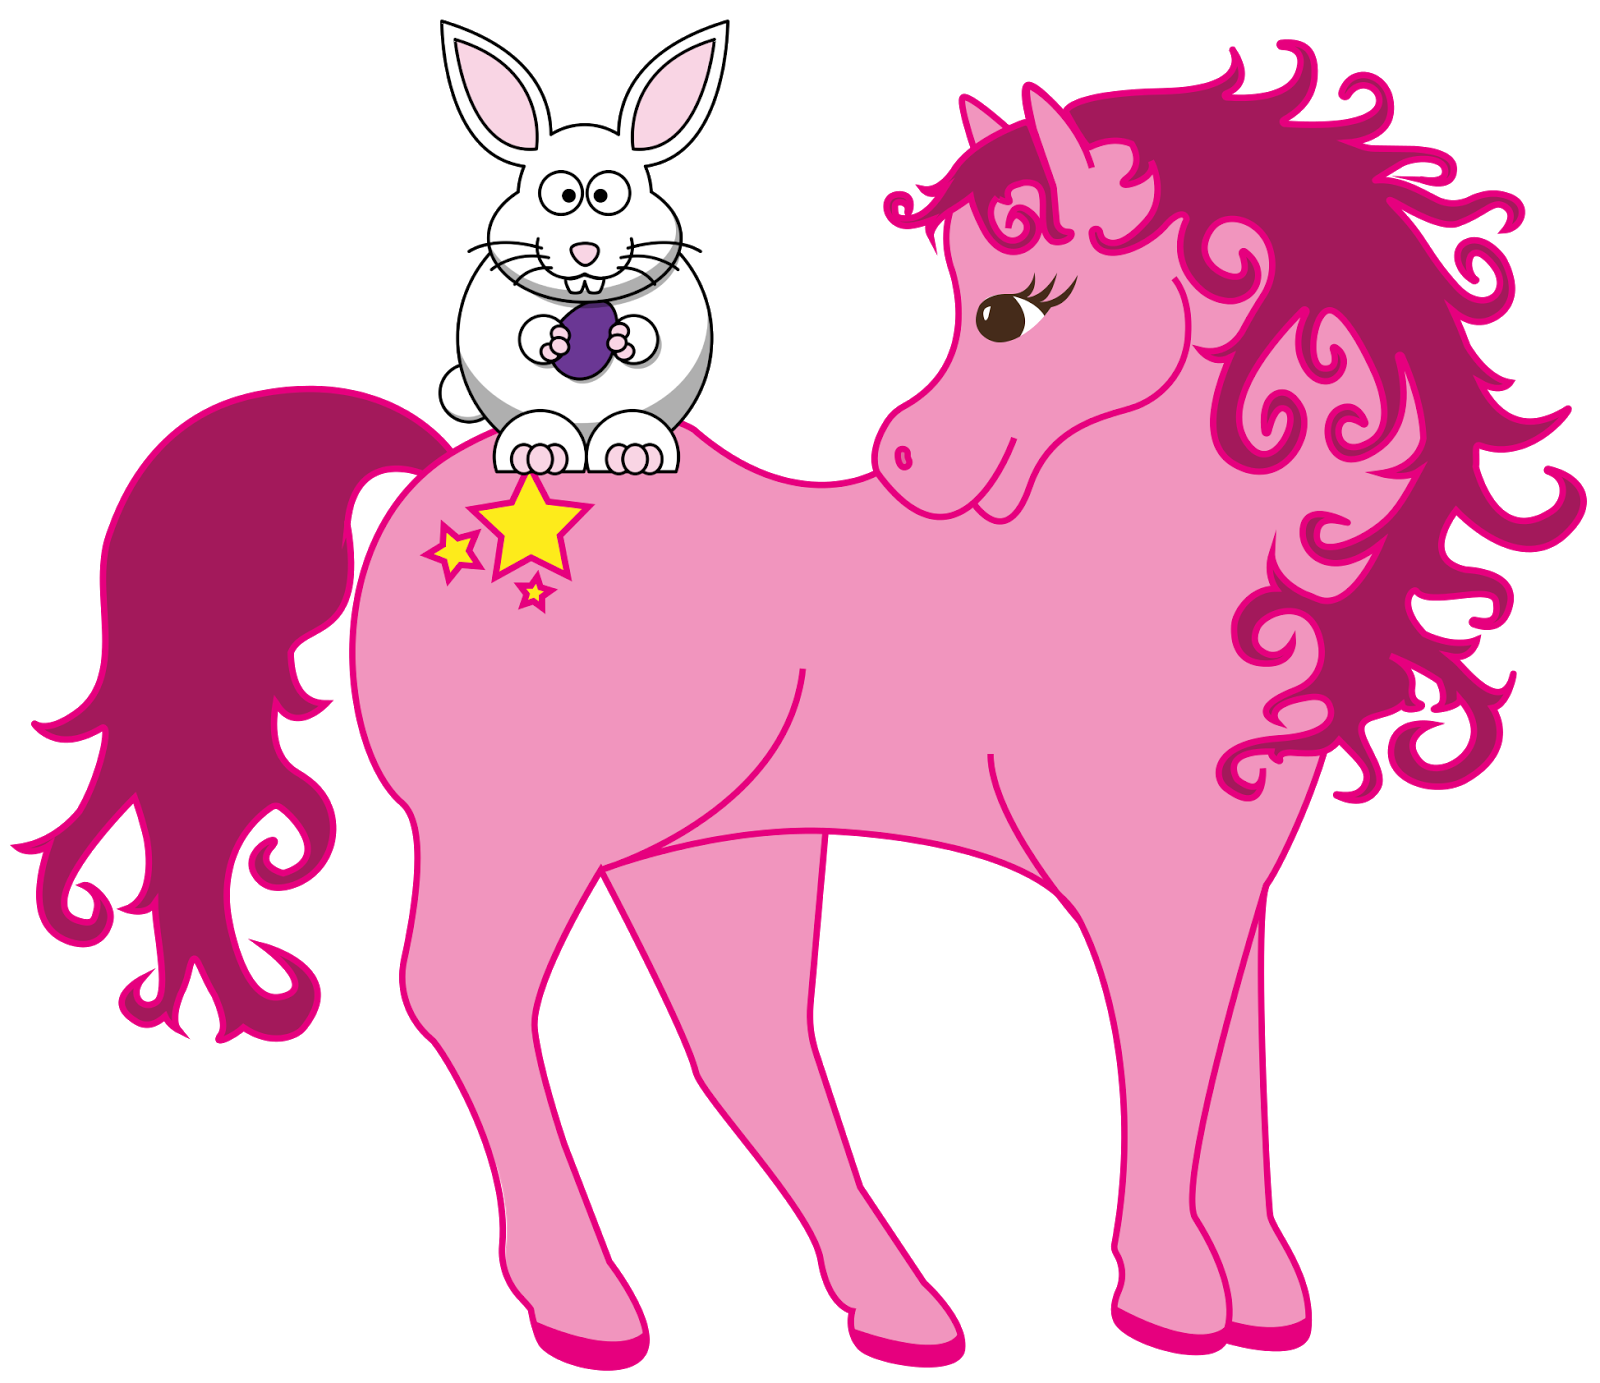 Free personal and commercial. Easter clipart horse